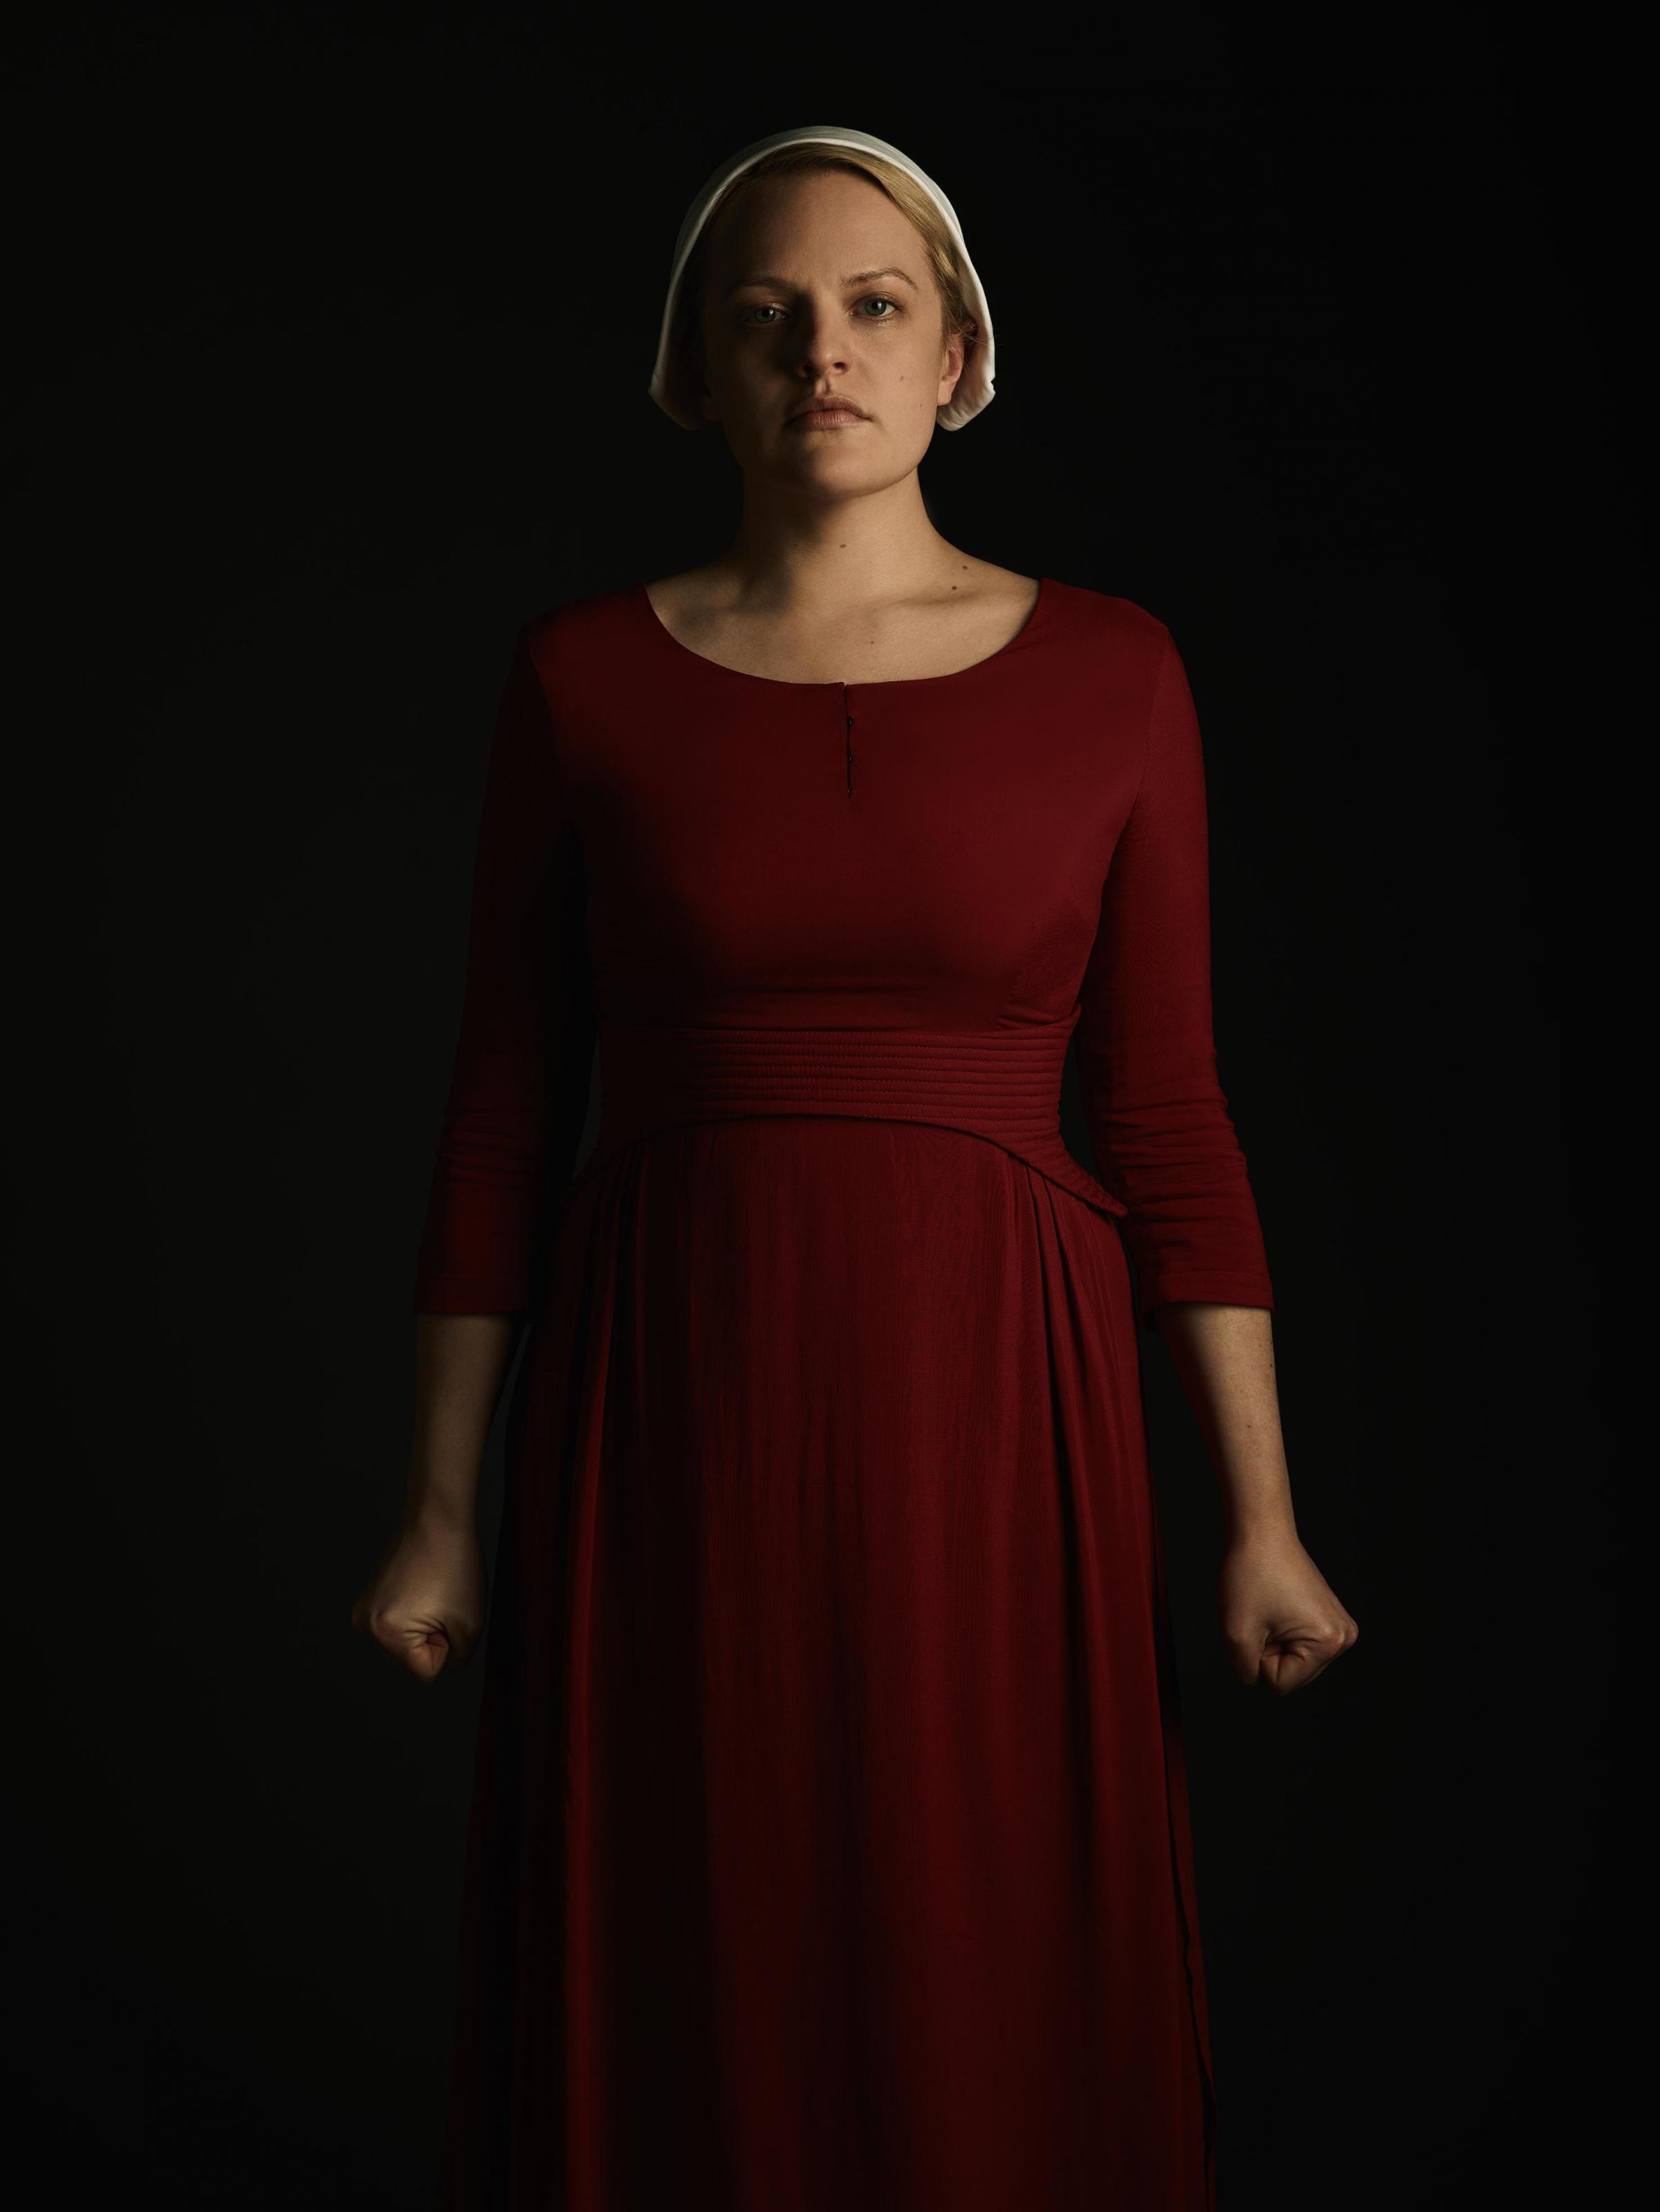 Margaret Atwood's The Handmaid's Tale is now an unburnable book